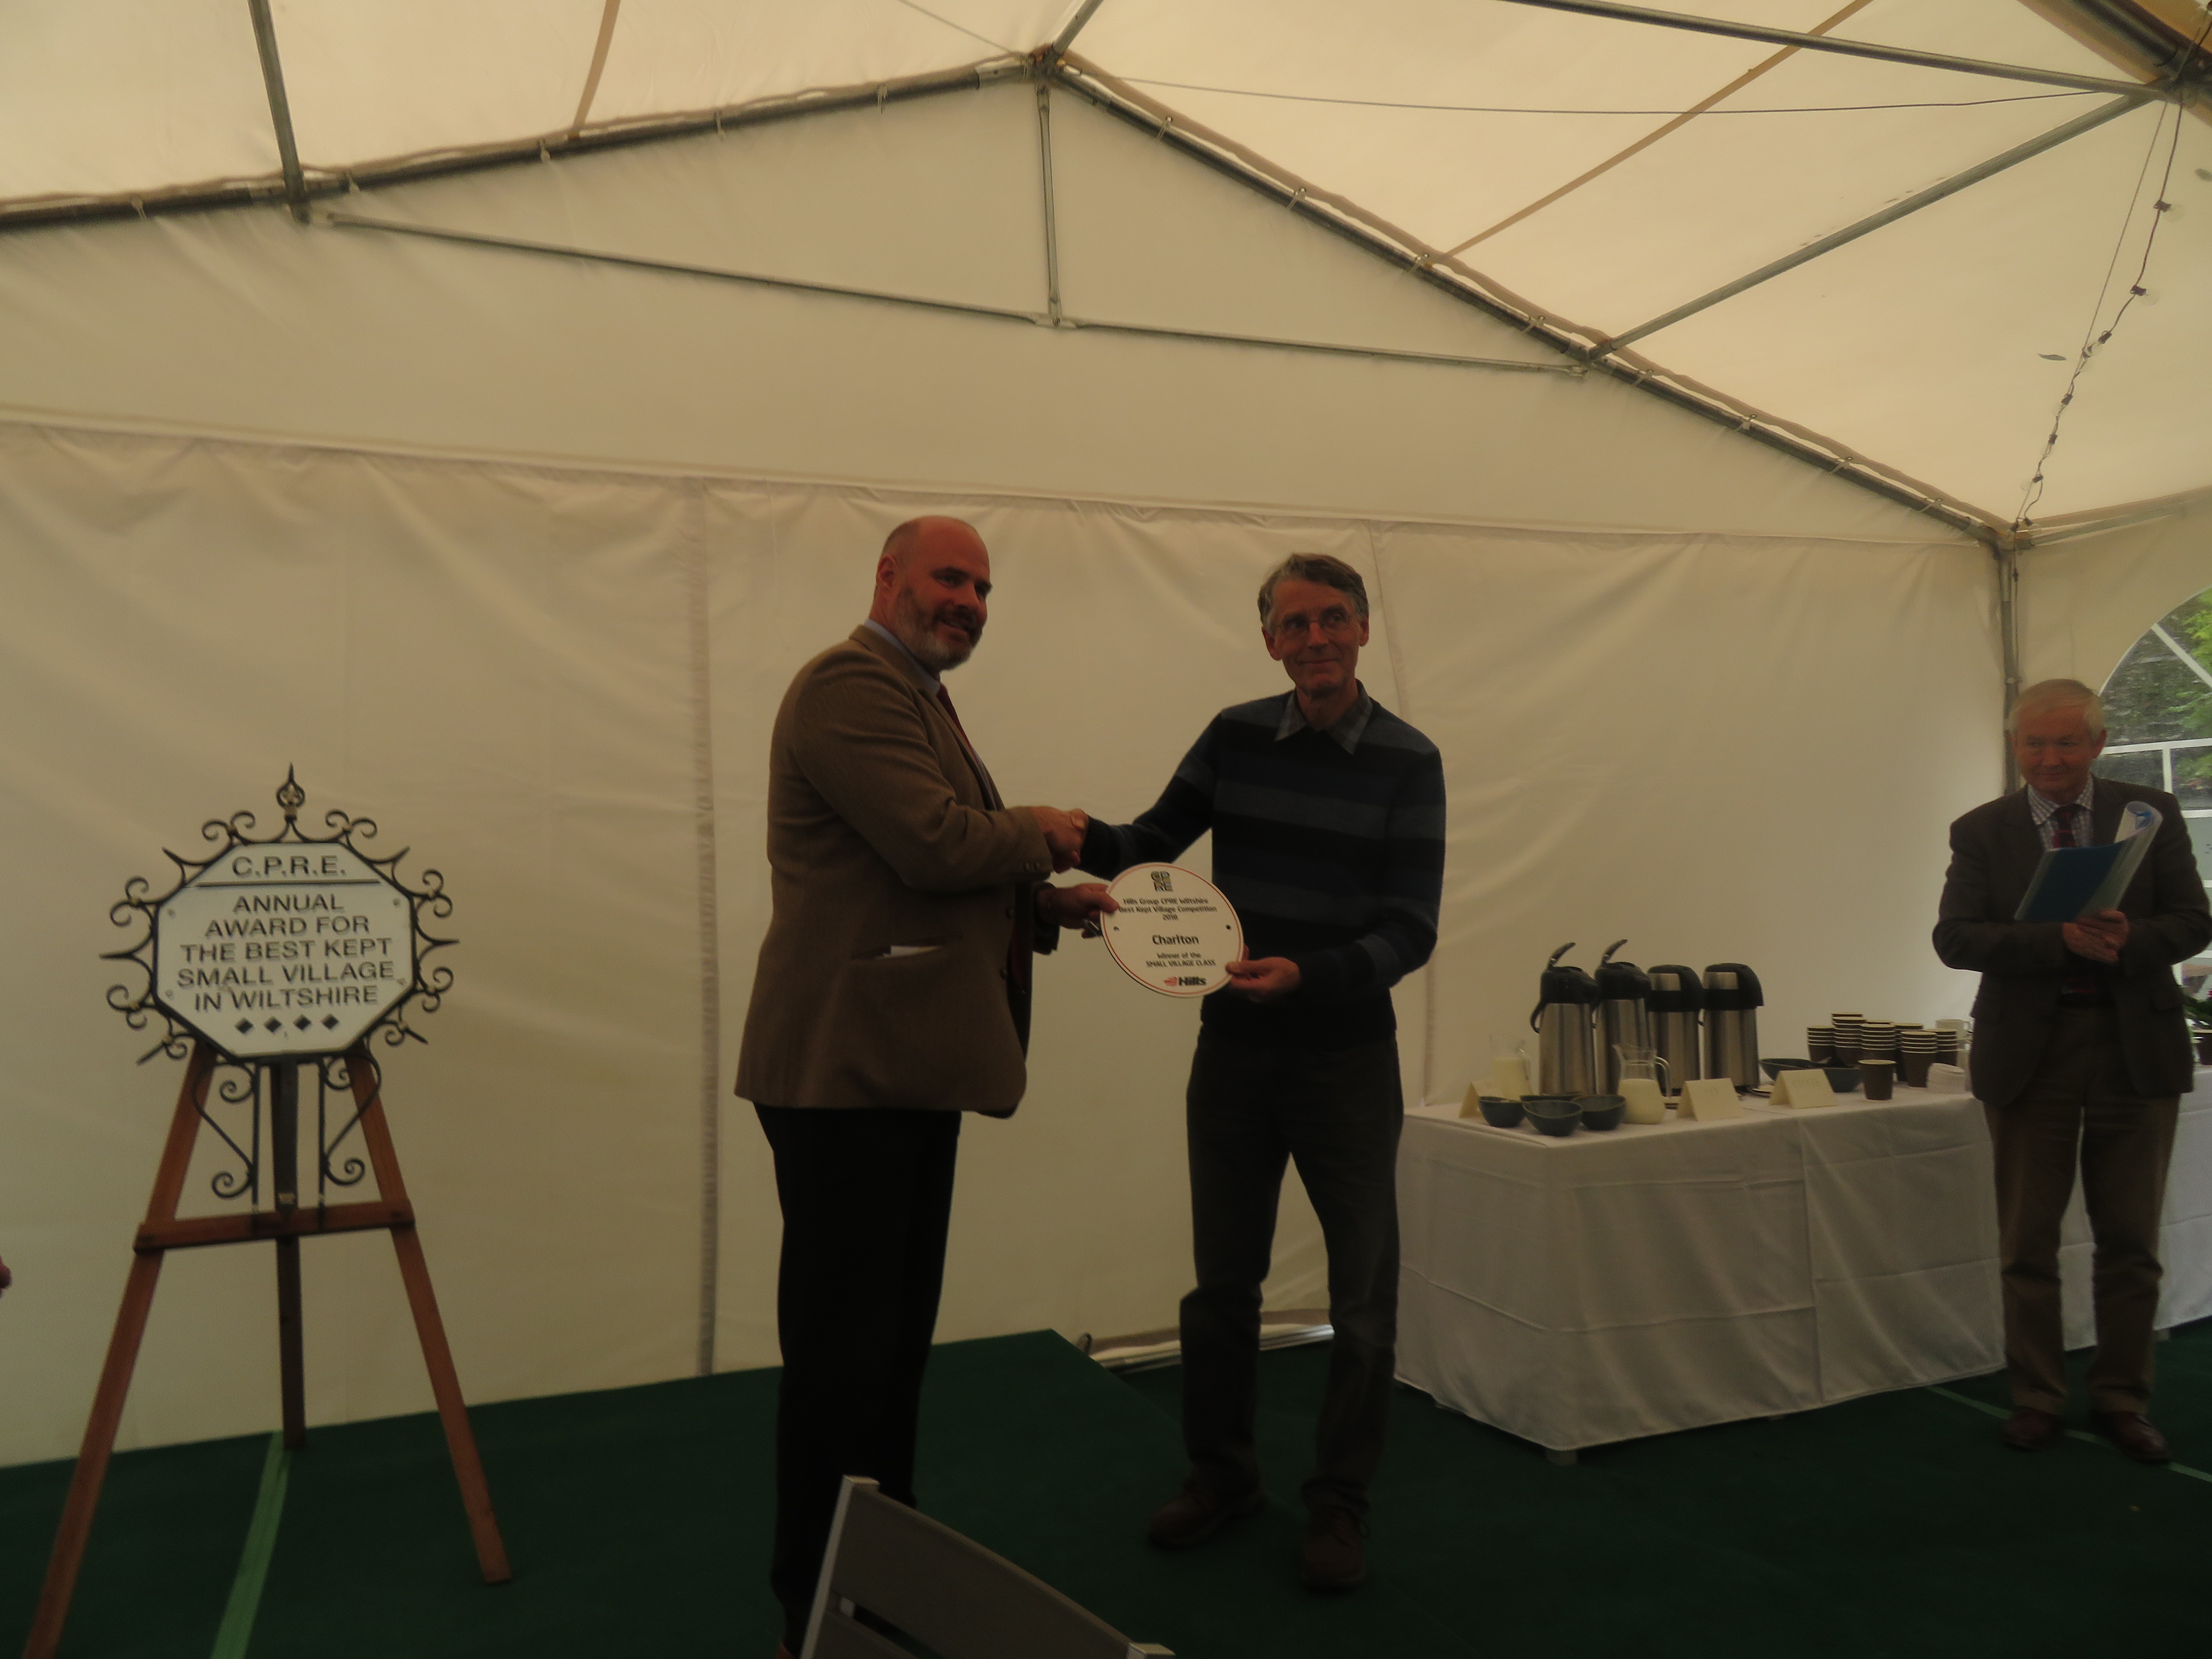 Mike Hill, Chief Executive of The Hills Group presents the plaque to Charlton's Peter Holland, editor of the local Village Chat